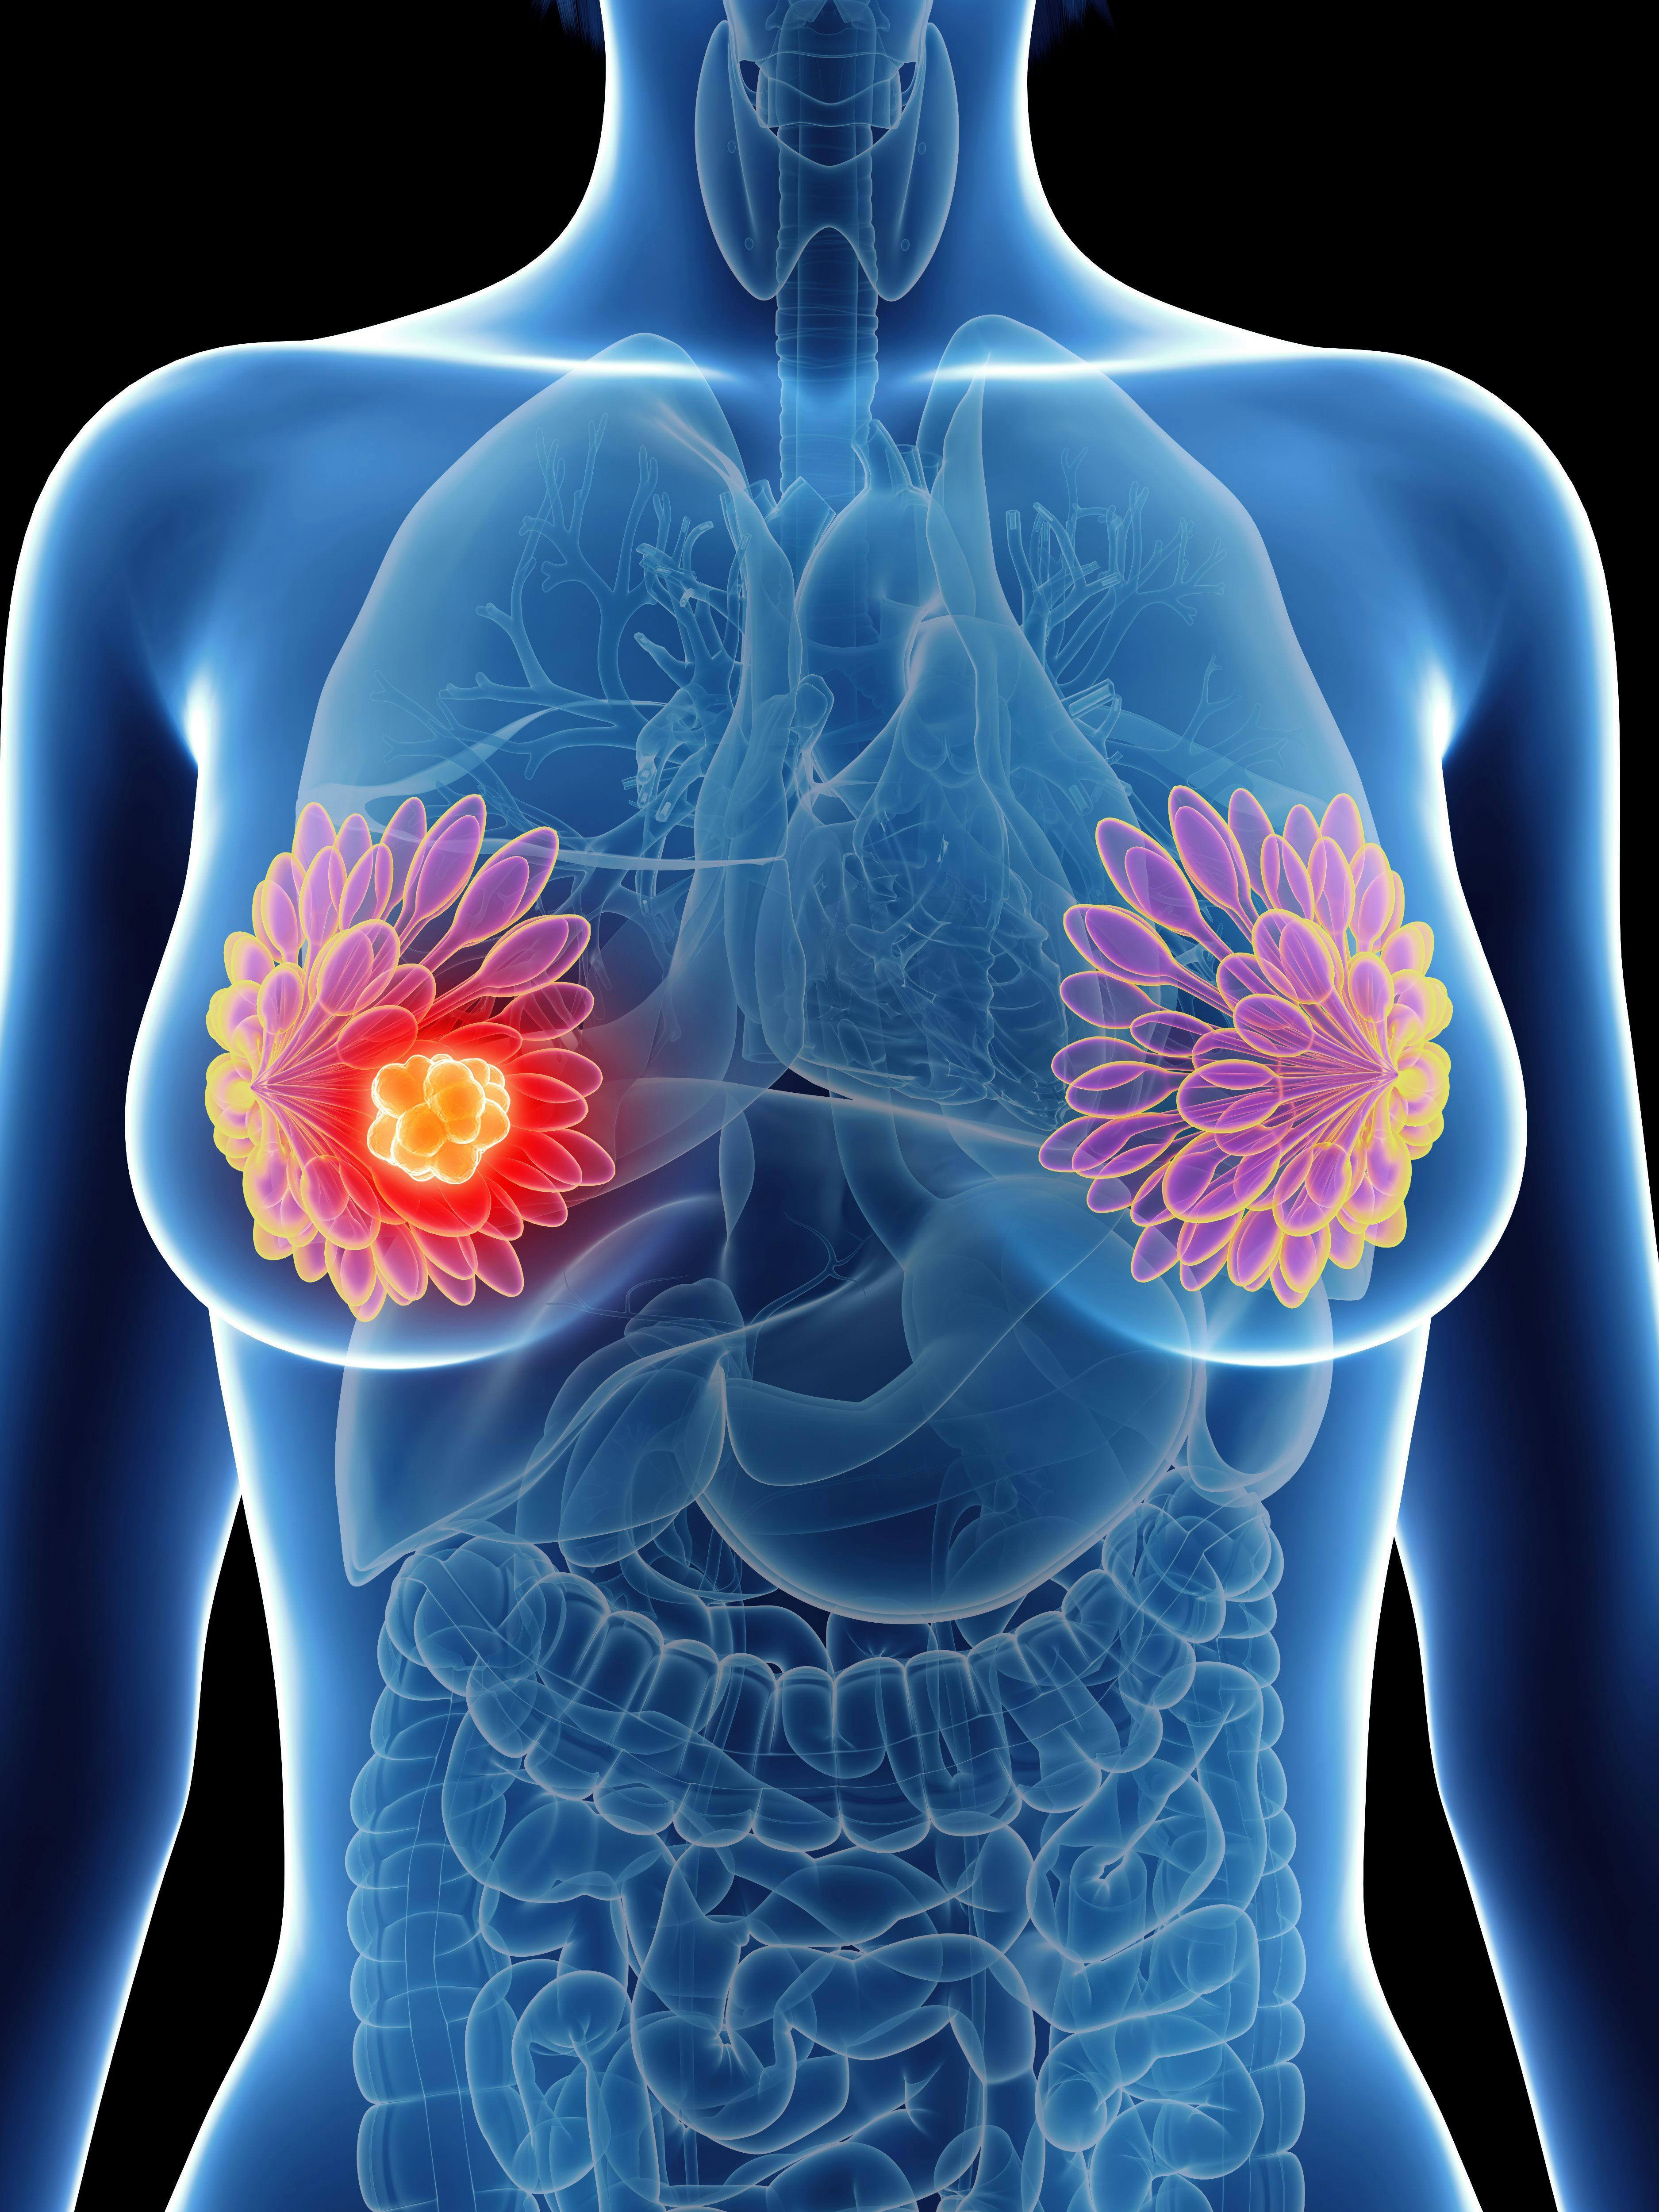 Long-term findings from the phase 2 GeparOLA trial indicate that olaparib plus paclitaxel and carboplatin did not result in further benefit vs paclitaxel, and carboplatin for patients with HER2-negative, homologous recombination–deficient early breast cancer.